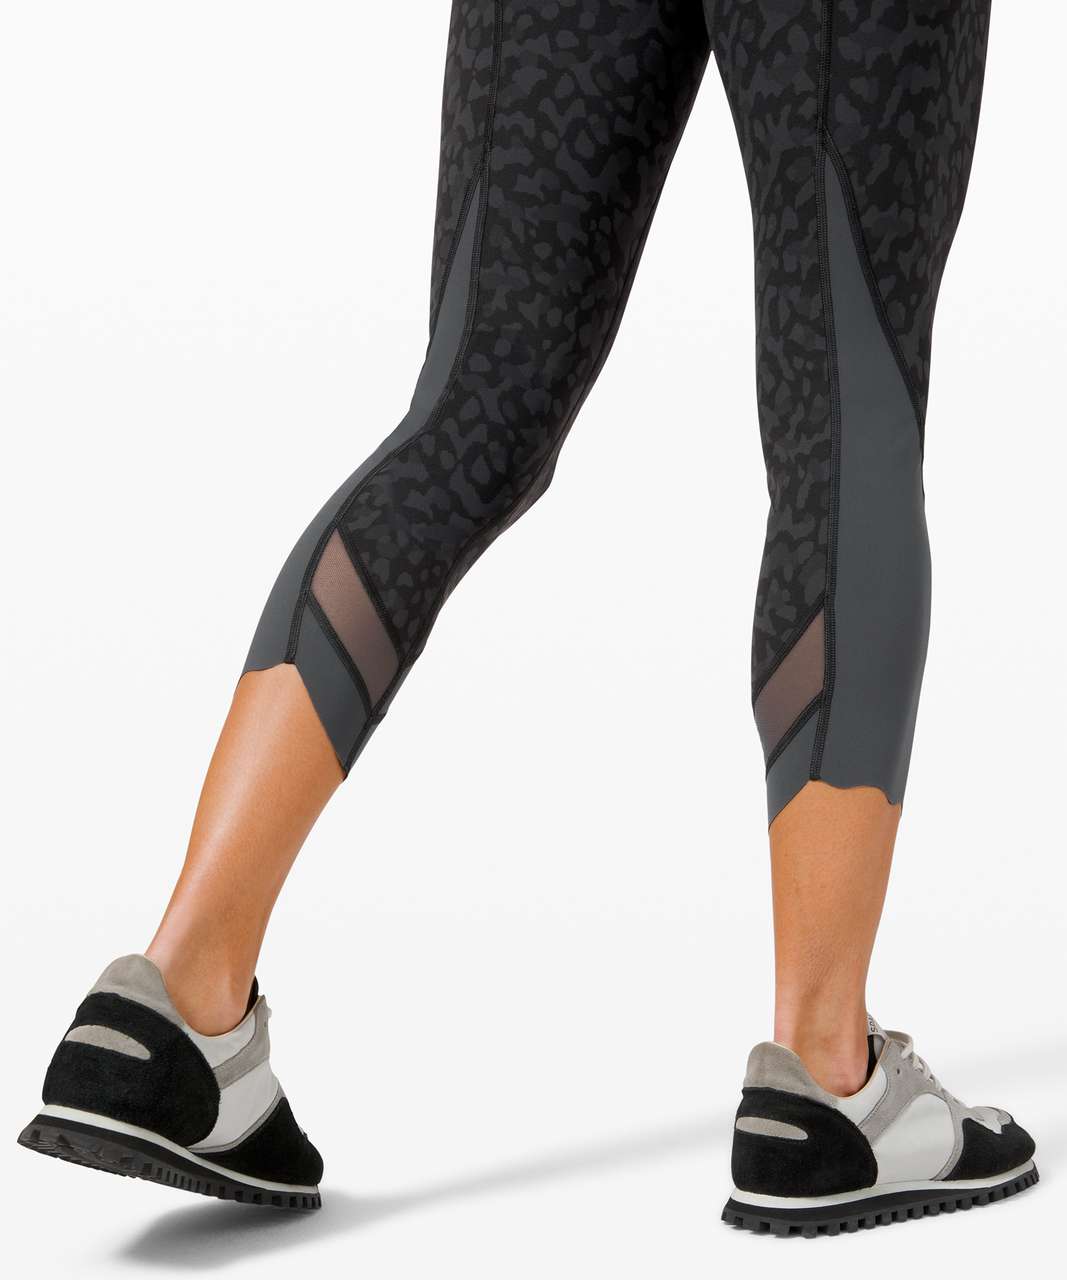 Lululemon Wunder Under Crop High-Rise *Roll Down Scallop Full-On Luxtreme 23" - Formation Camo Deep Coal Multi  / Deep Coal